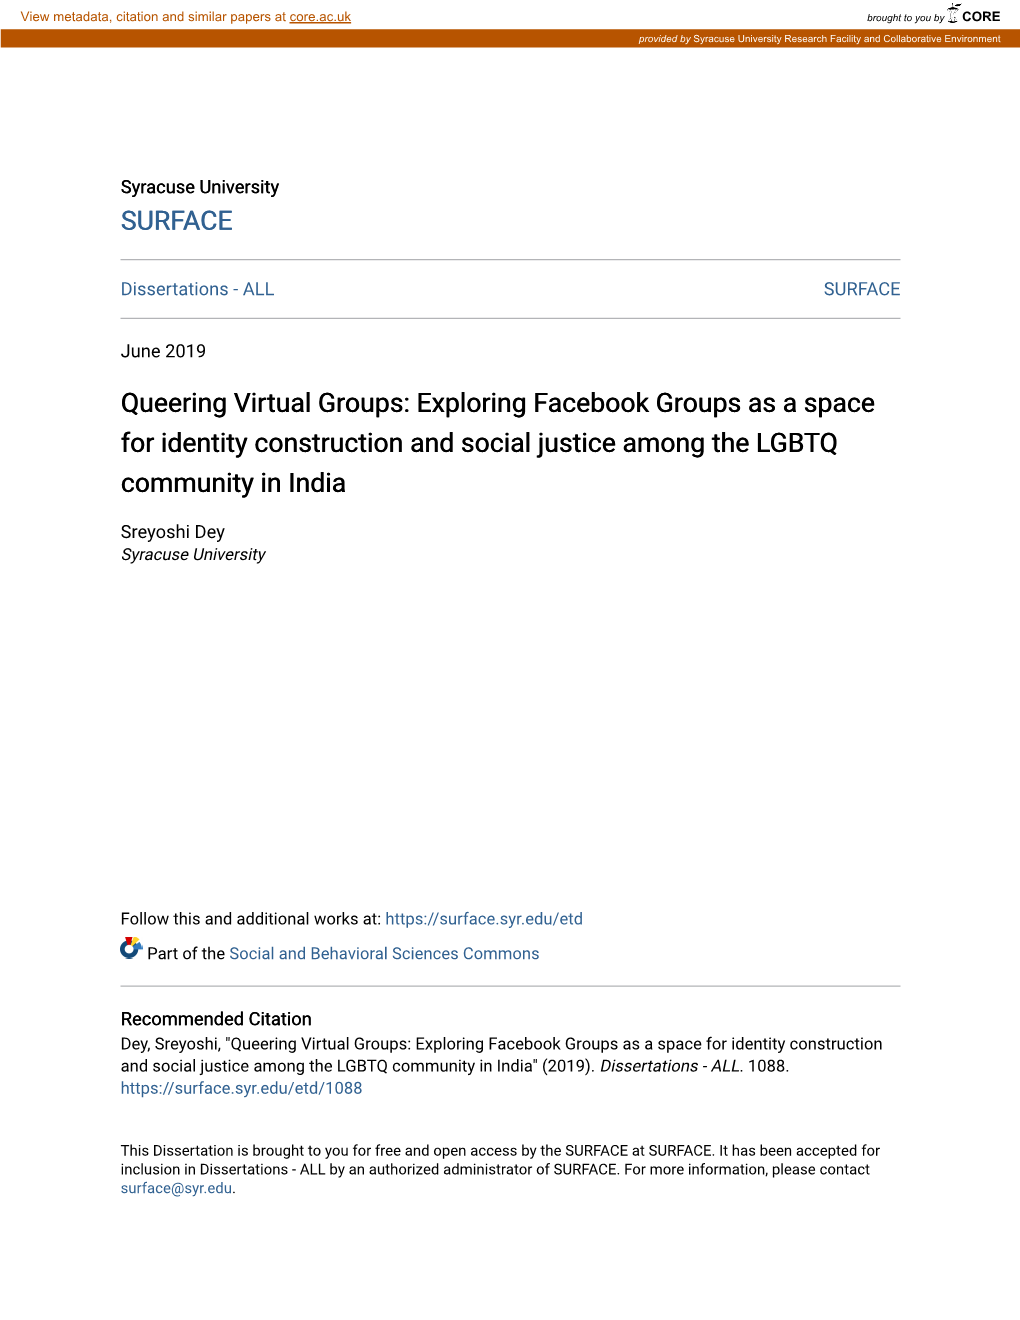 Exploring Facebook Groups As a Space for Identity Construction and Social Justice Among the LGBTQ Community in India